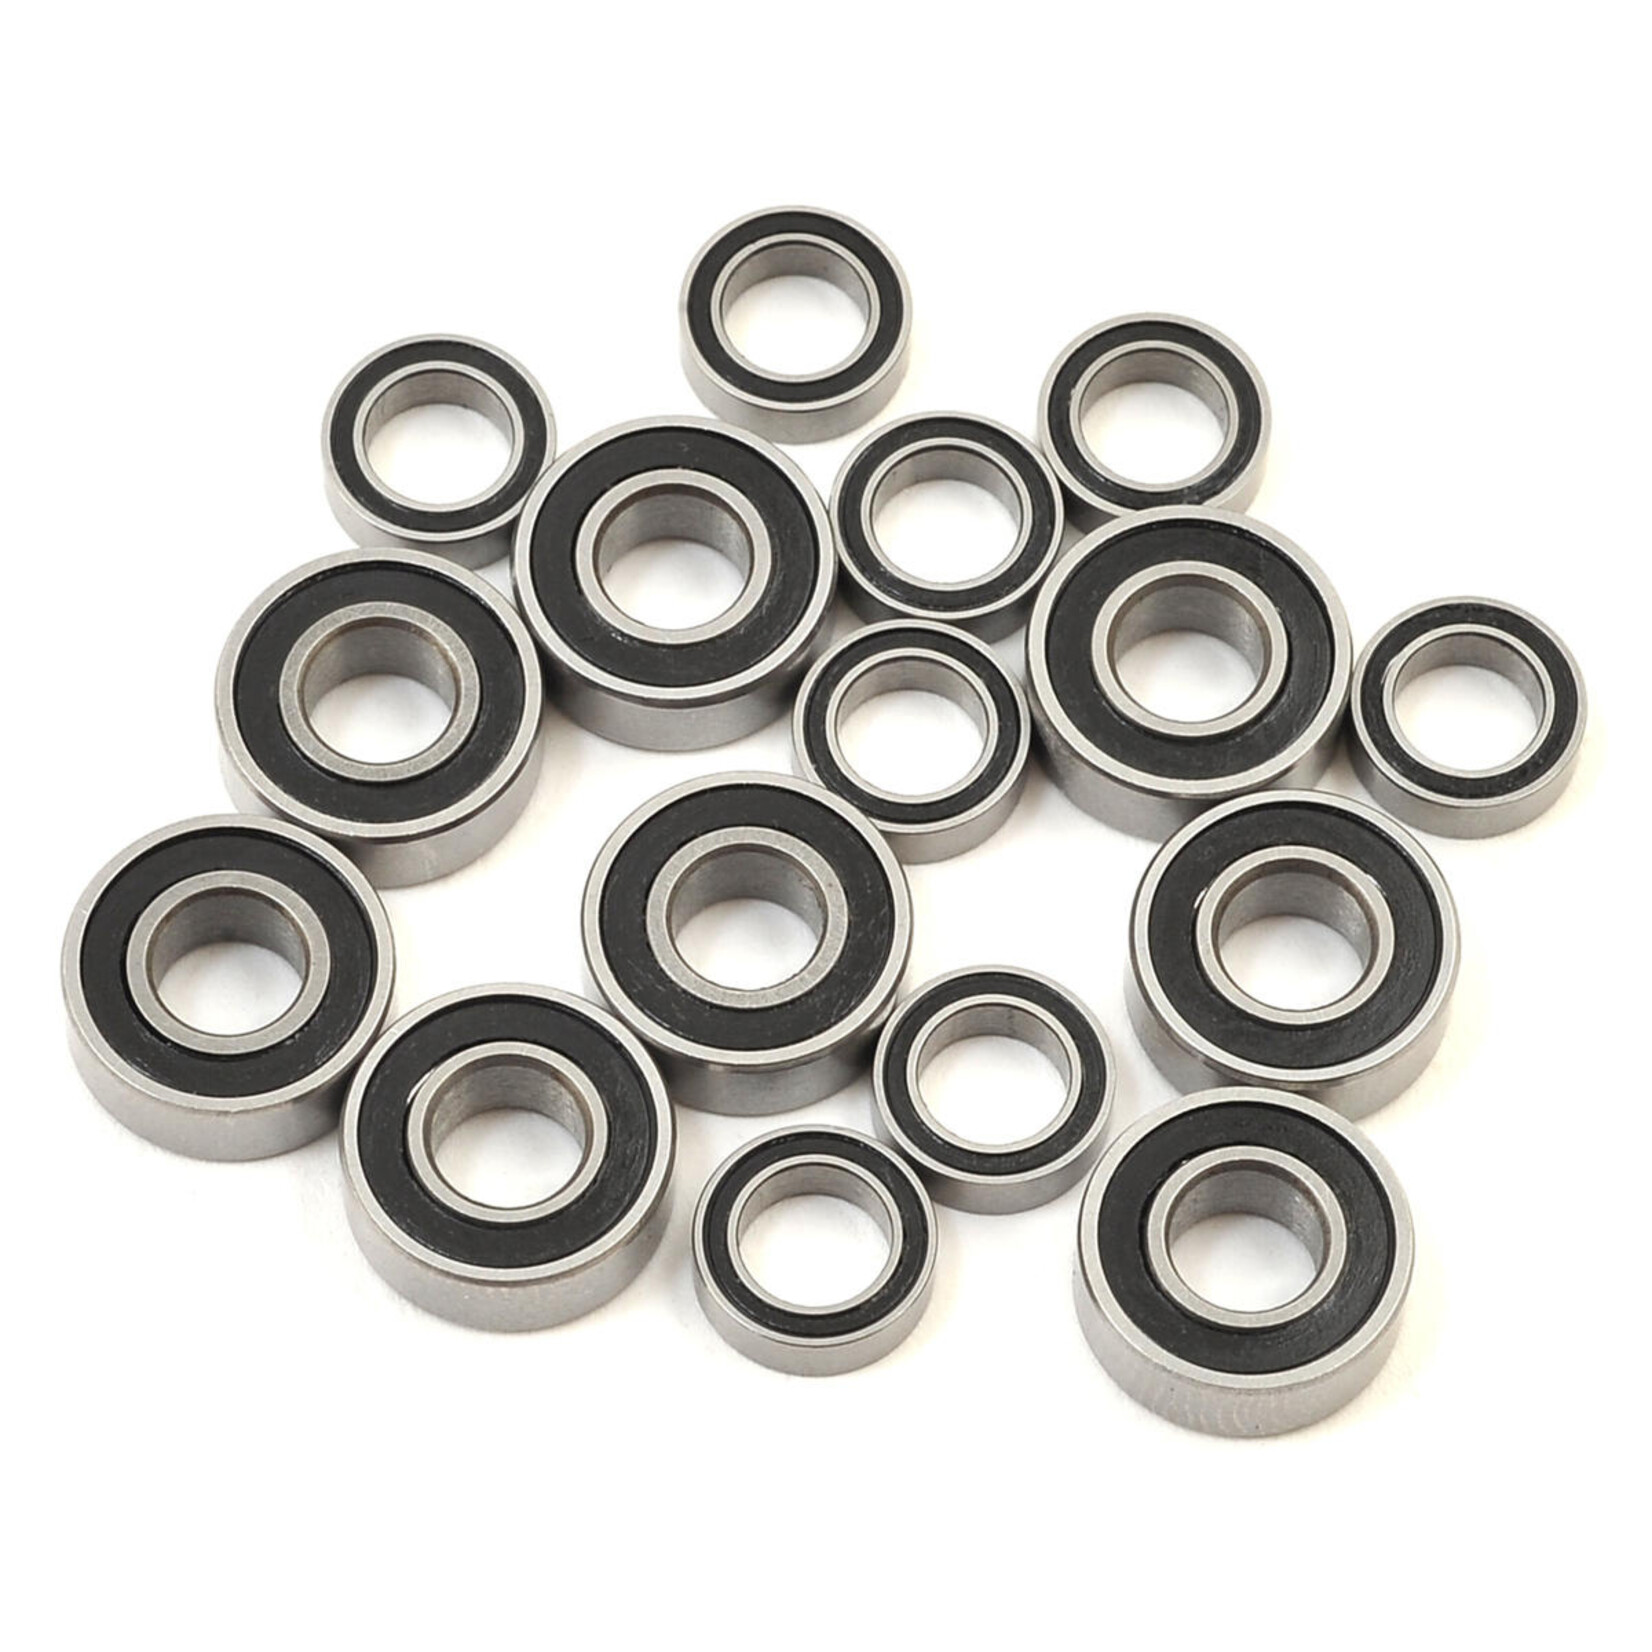 FastEddy FastEddy Traxxas Stampede Bearing Kit #TFE1170